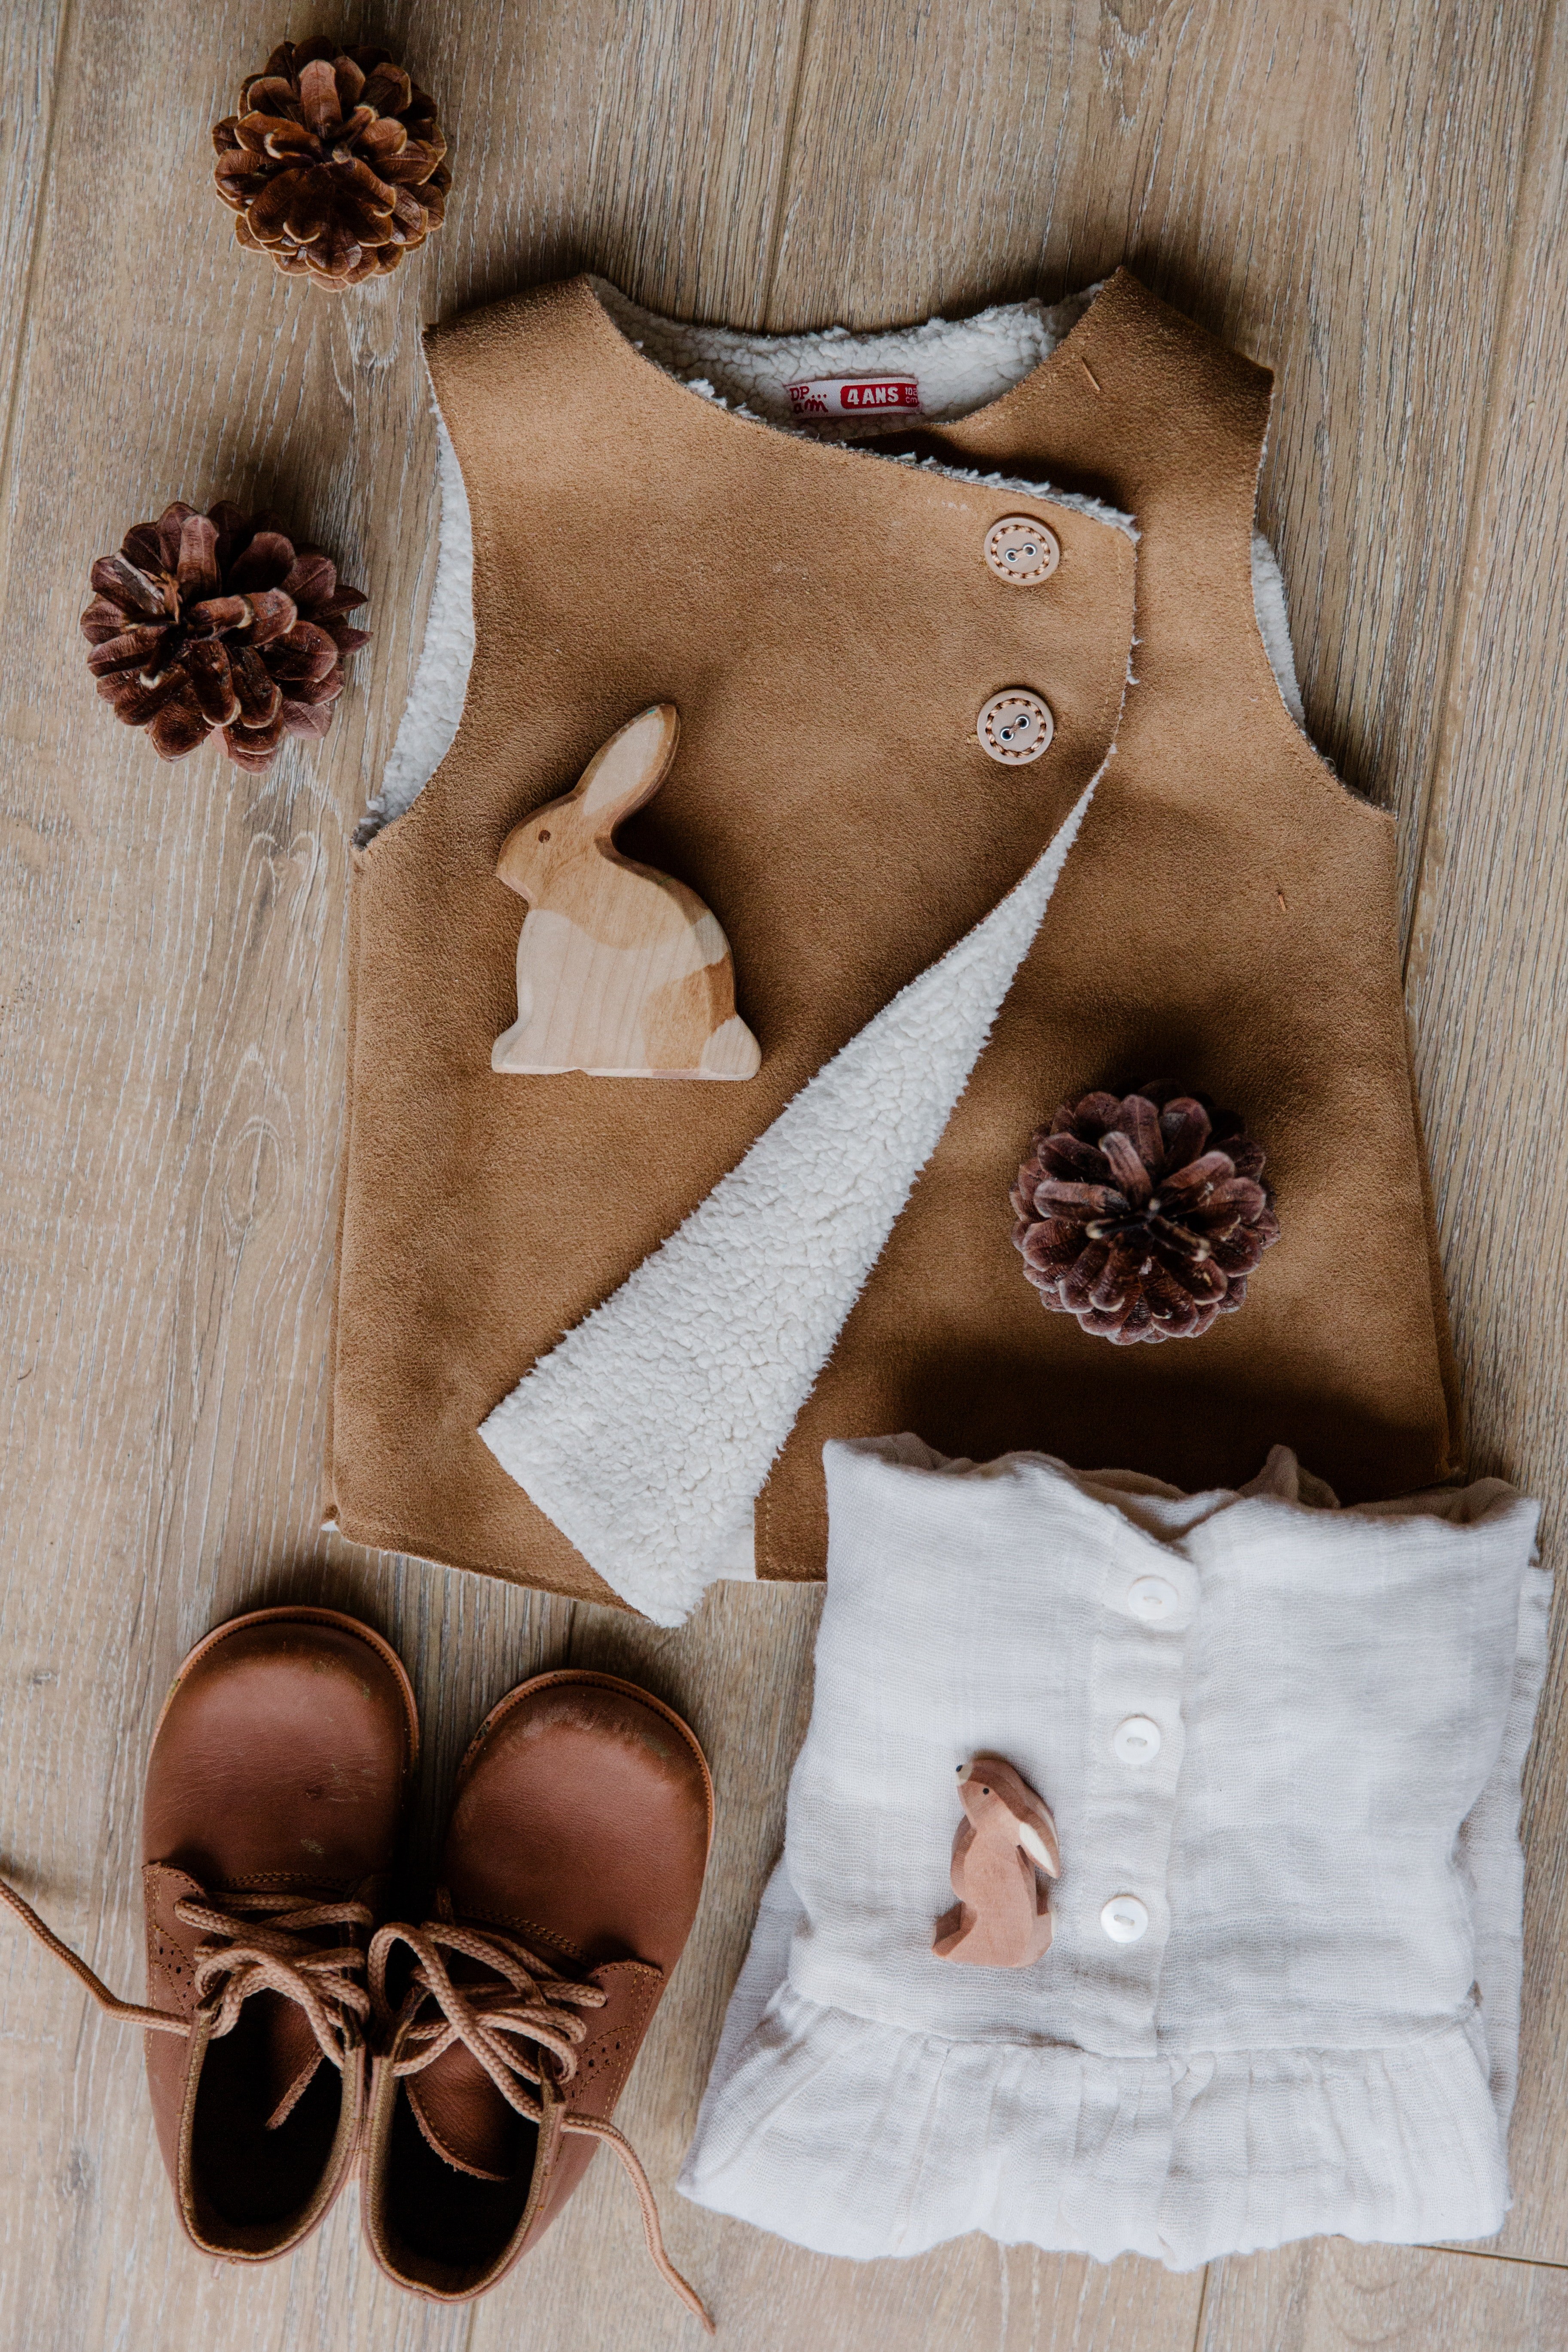 Victor found baby shoes and clothes inside. | Source: Pexels